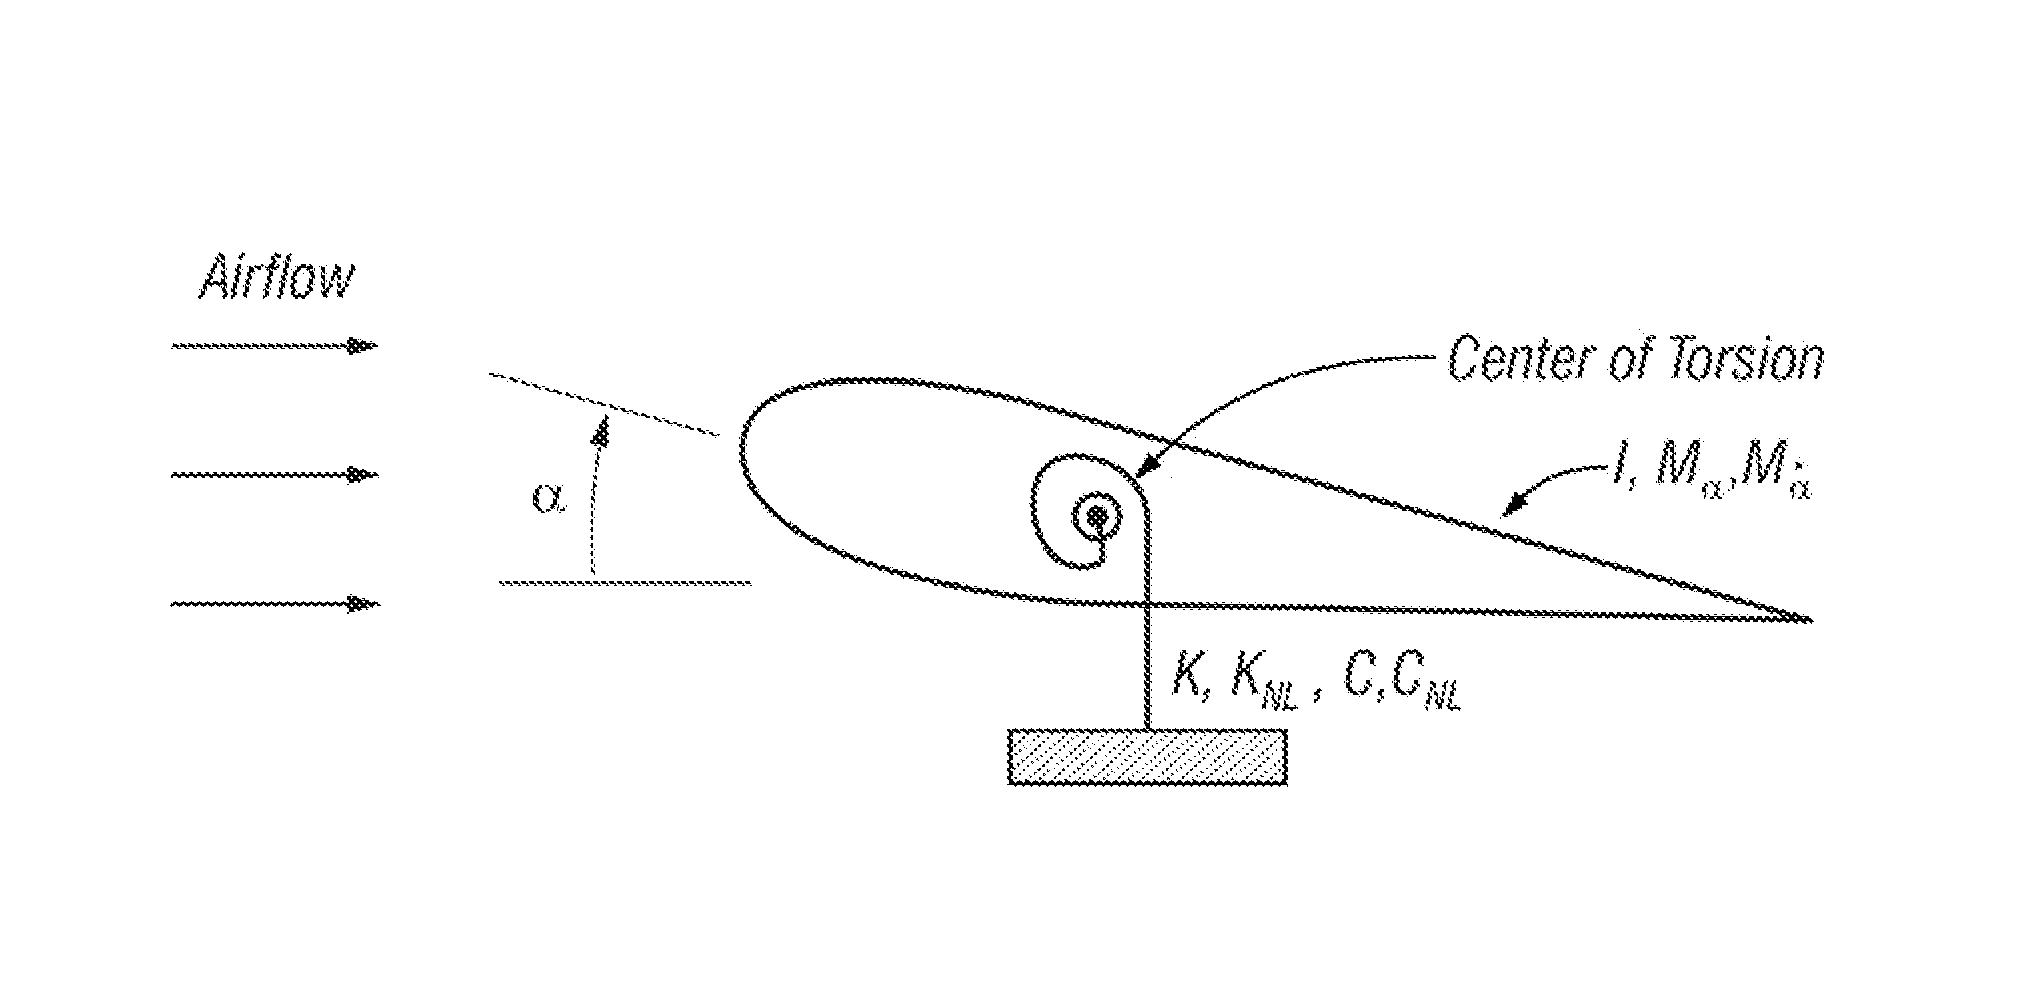 Nonlinear power flow feedback control for improved stability and performance of airfoil sections